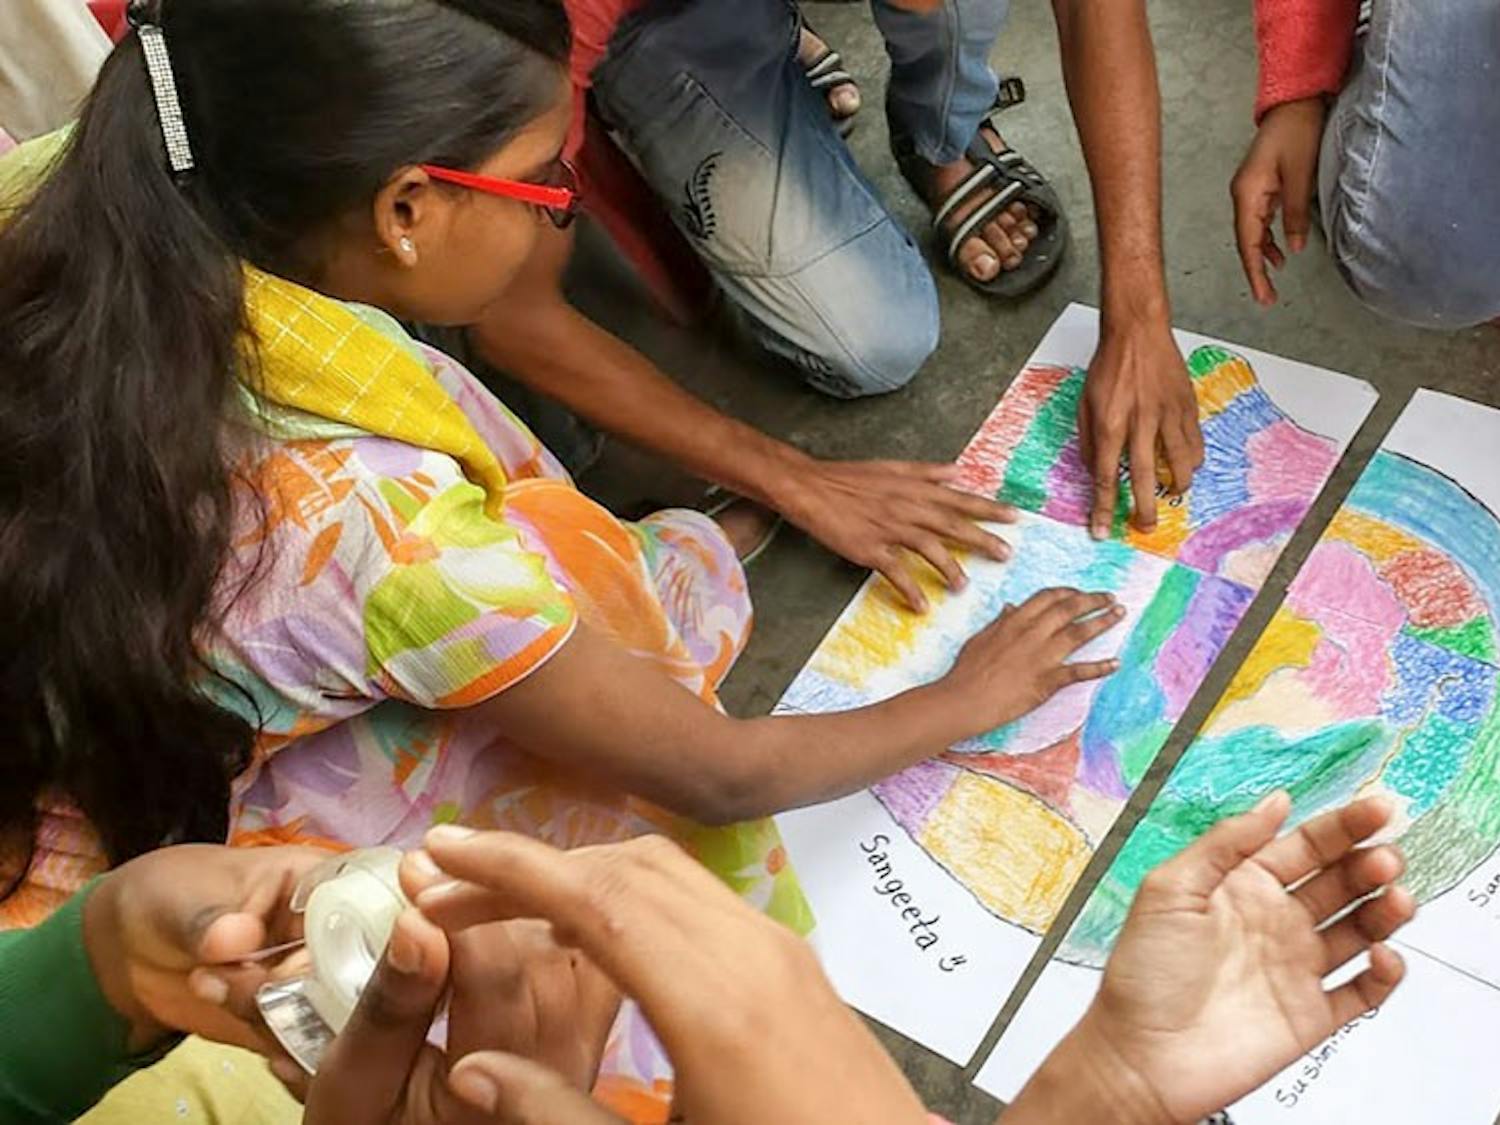 Students at Calcutta Rescue work together on a project for Beyond the Block. Calcutta Rescue is a non-government organization specialized in helping and educating children from nearby slums.